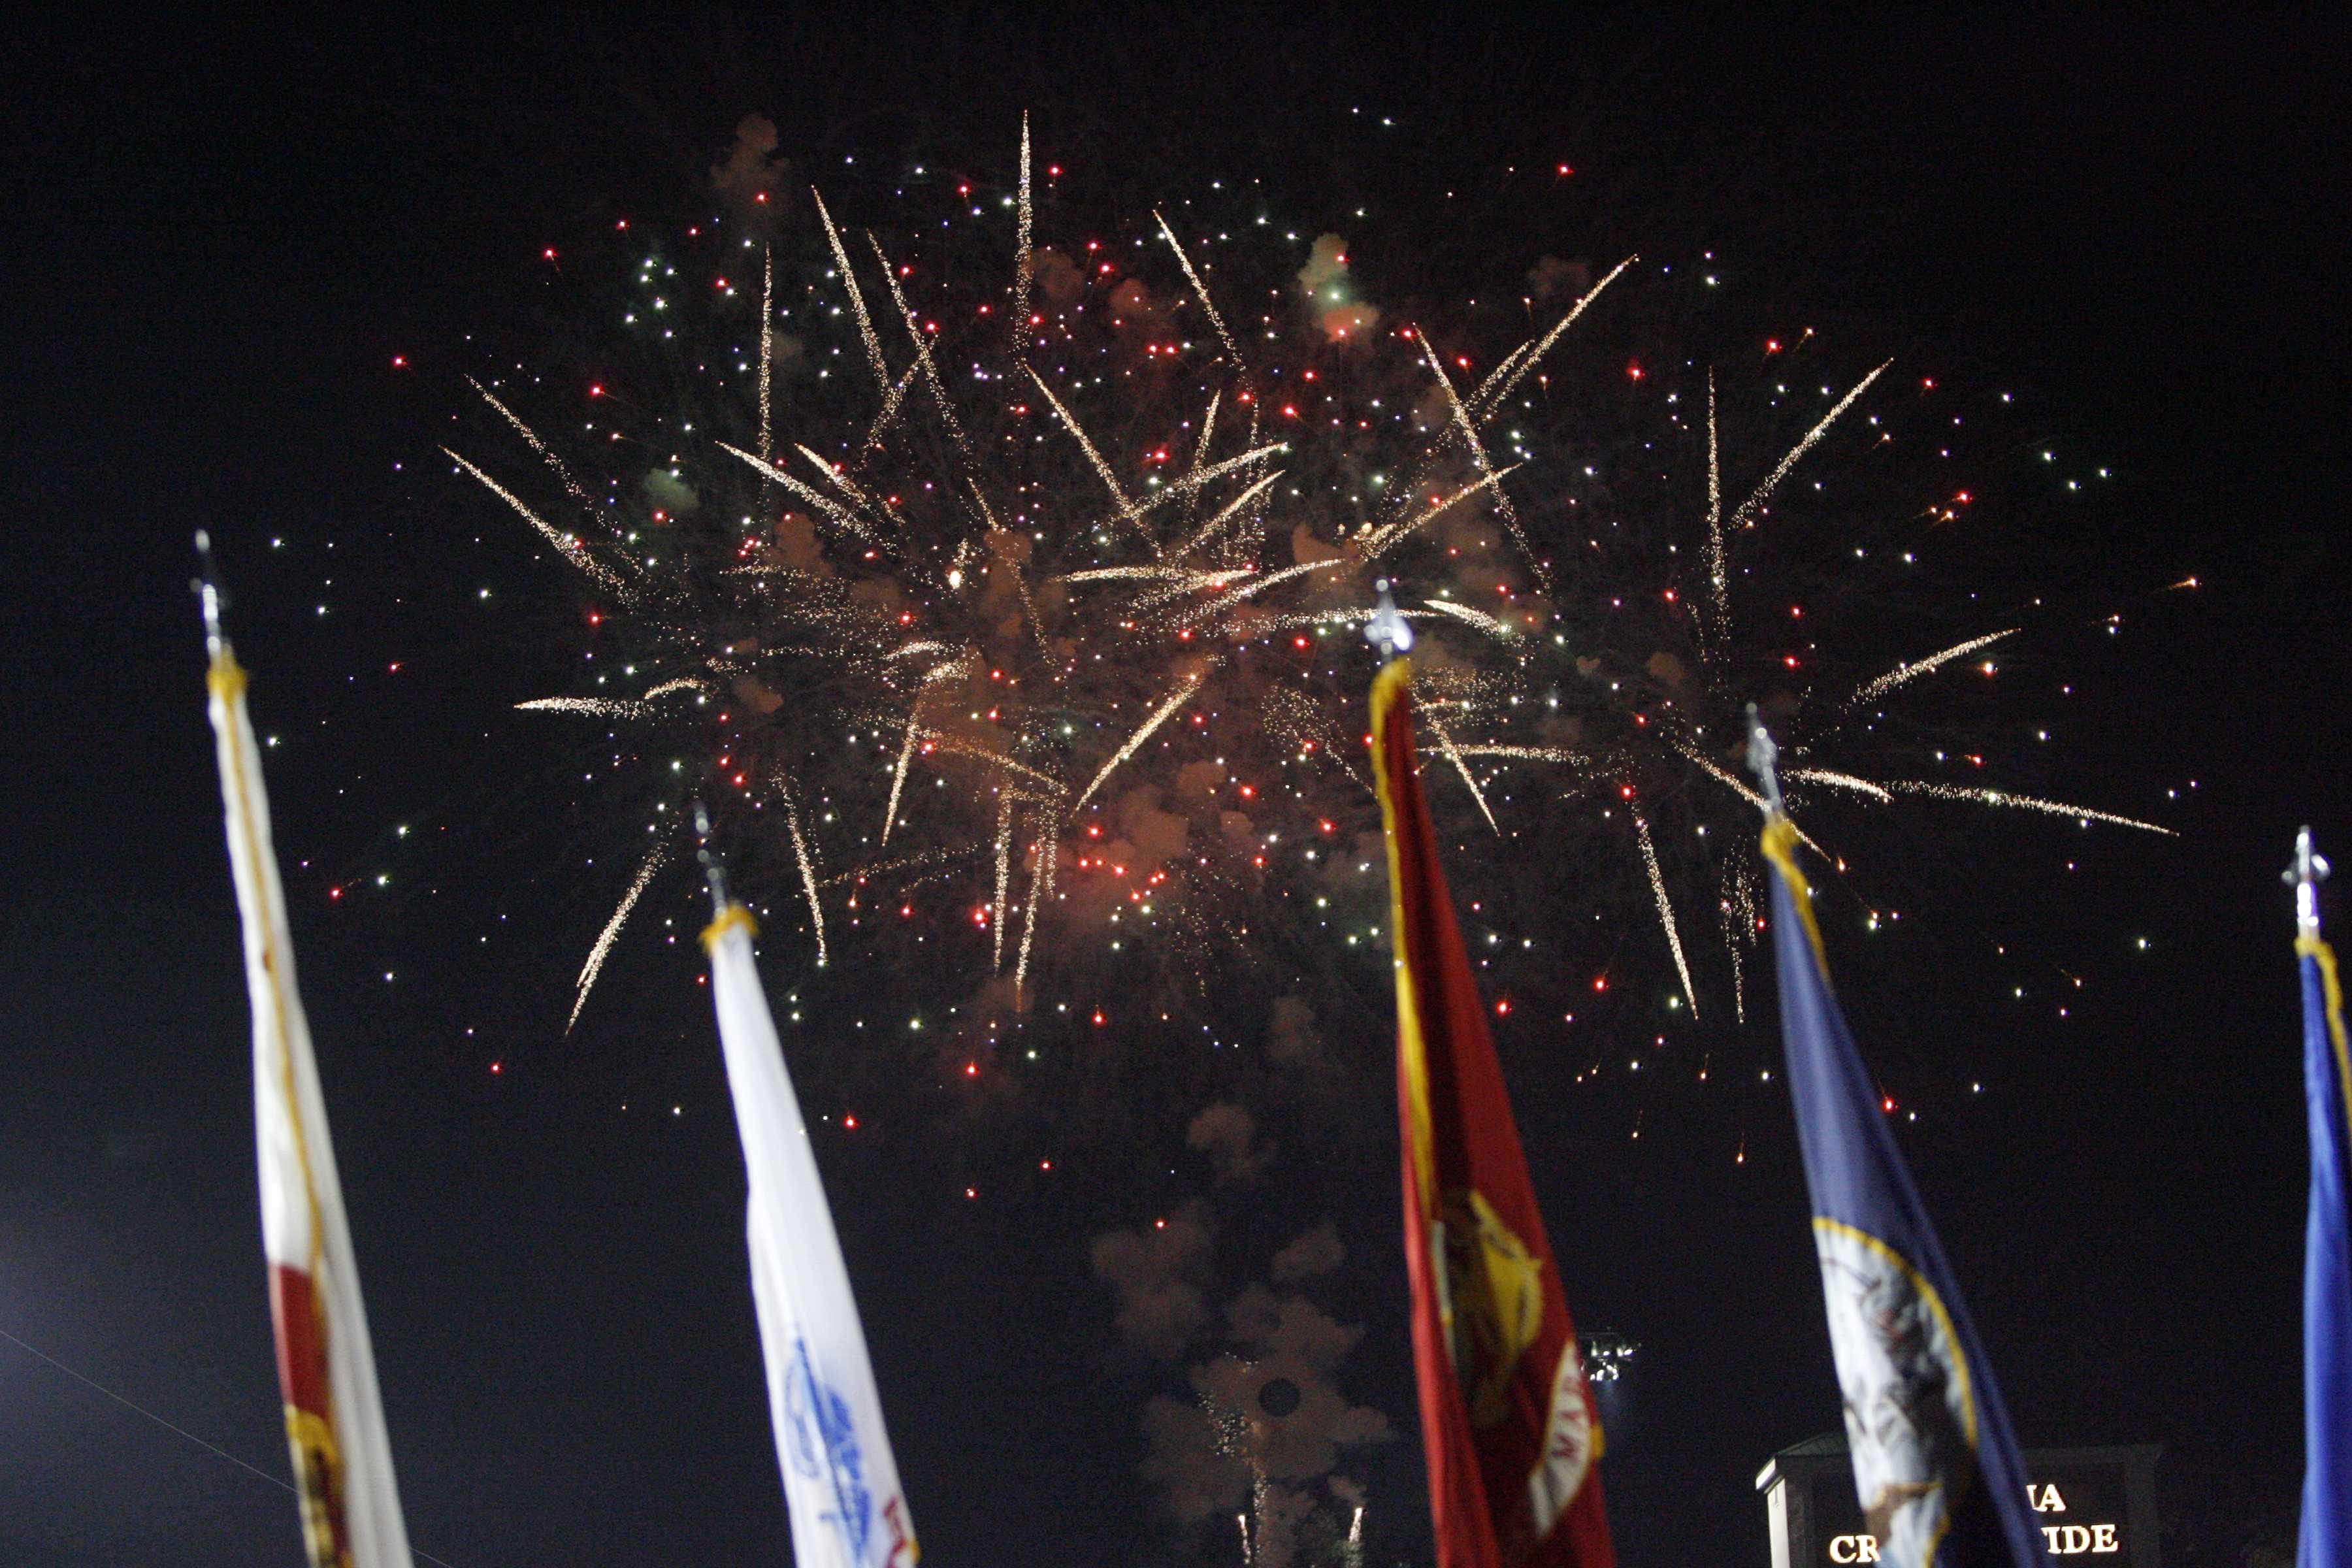 Fireworks shown behind flags